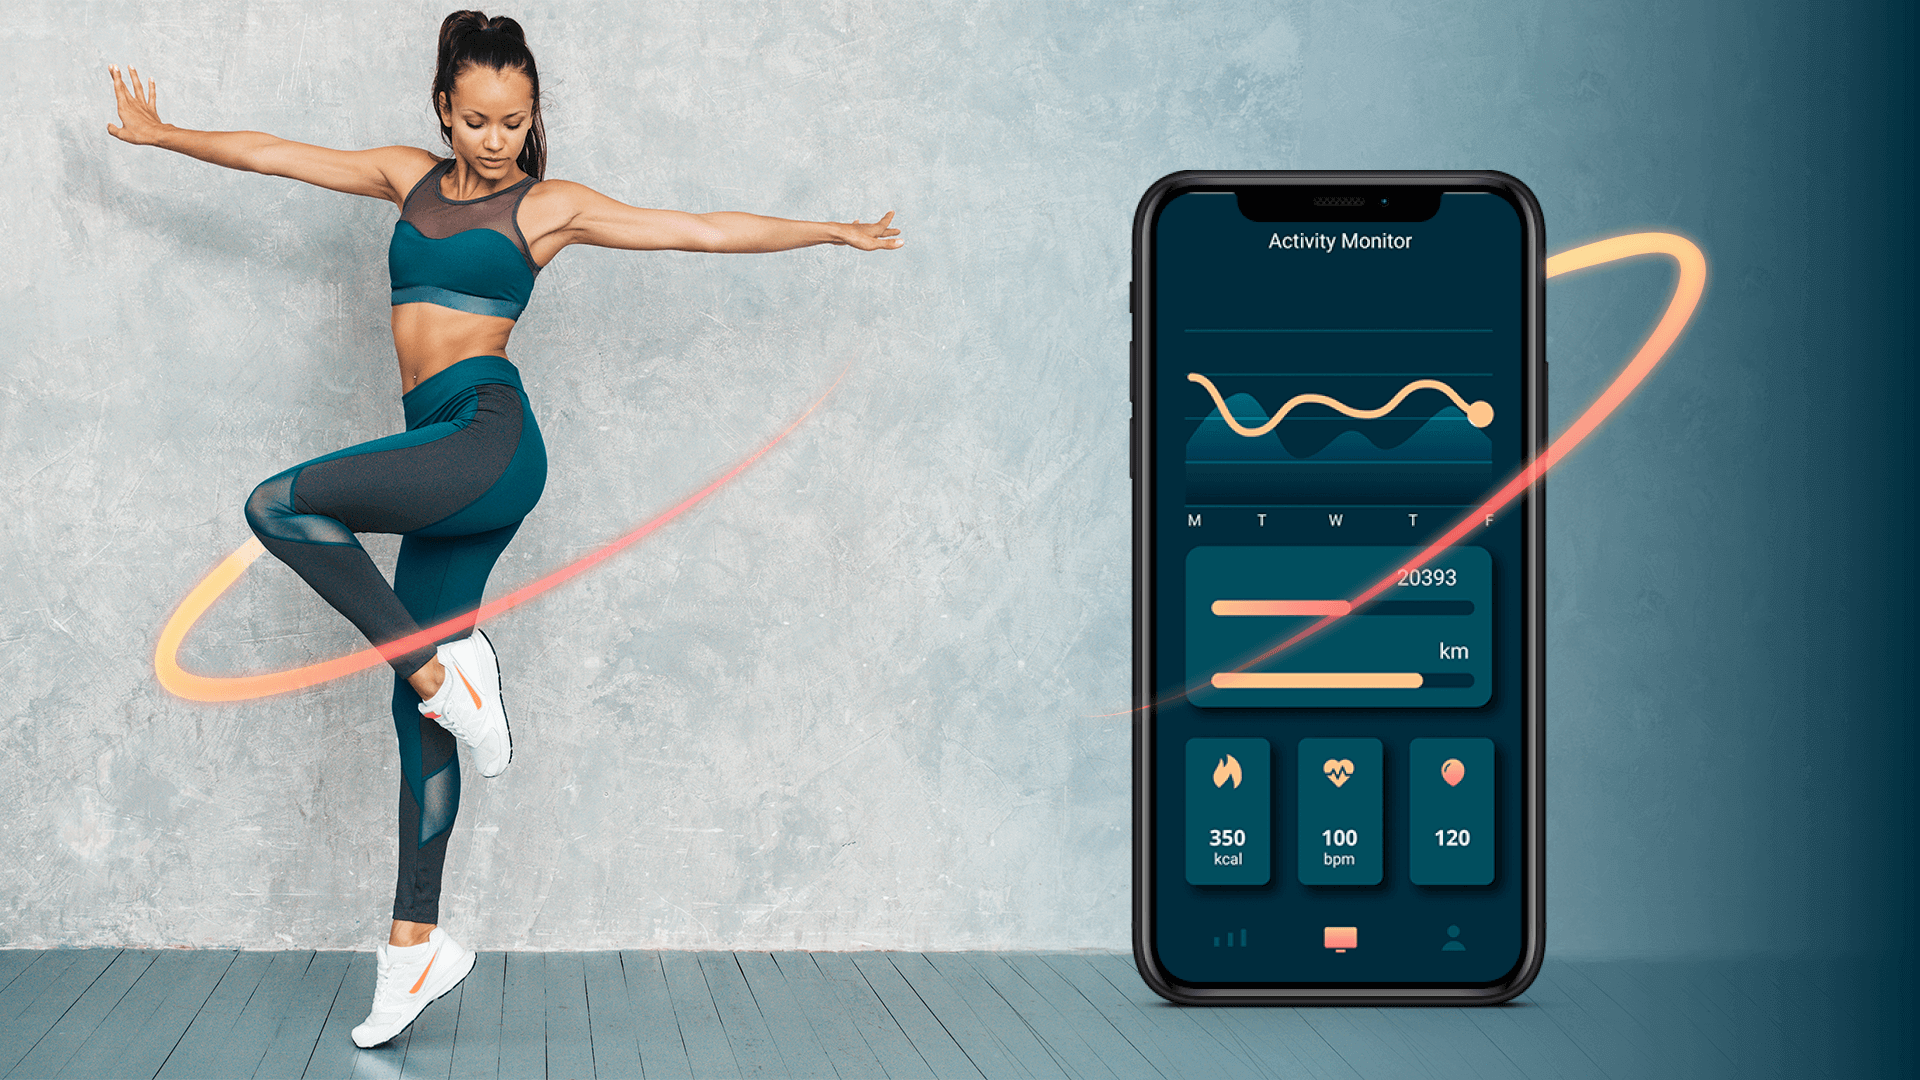 Developers thoroughly choose essential fitness application elements so users can enjoy the simplicity and high functionality of your solution.